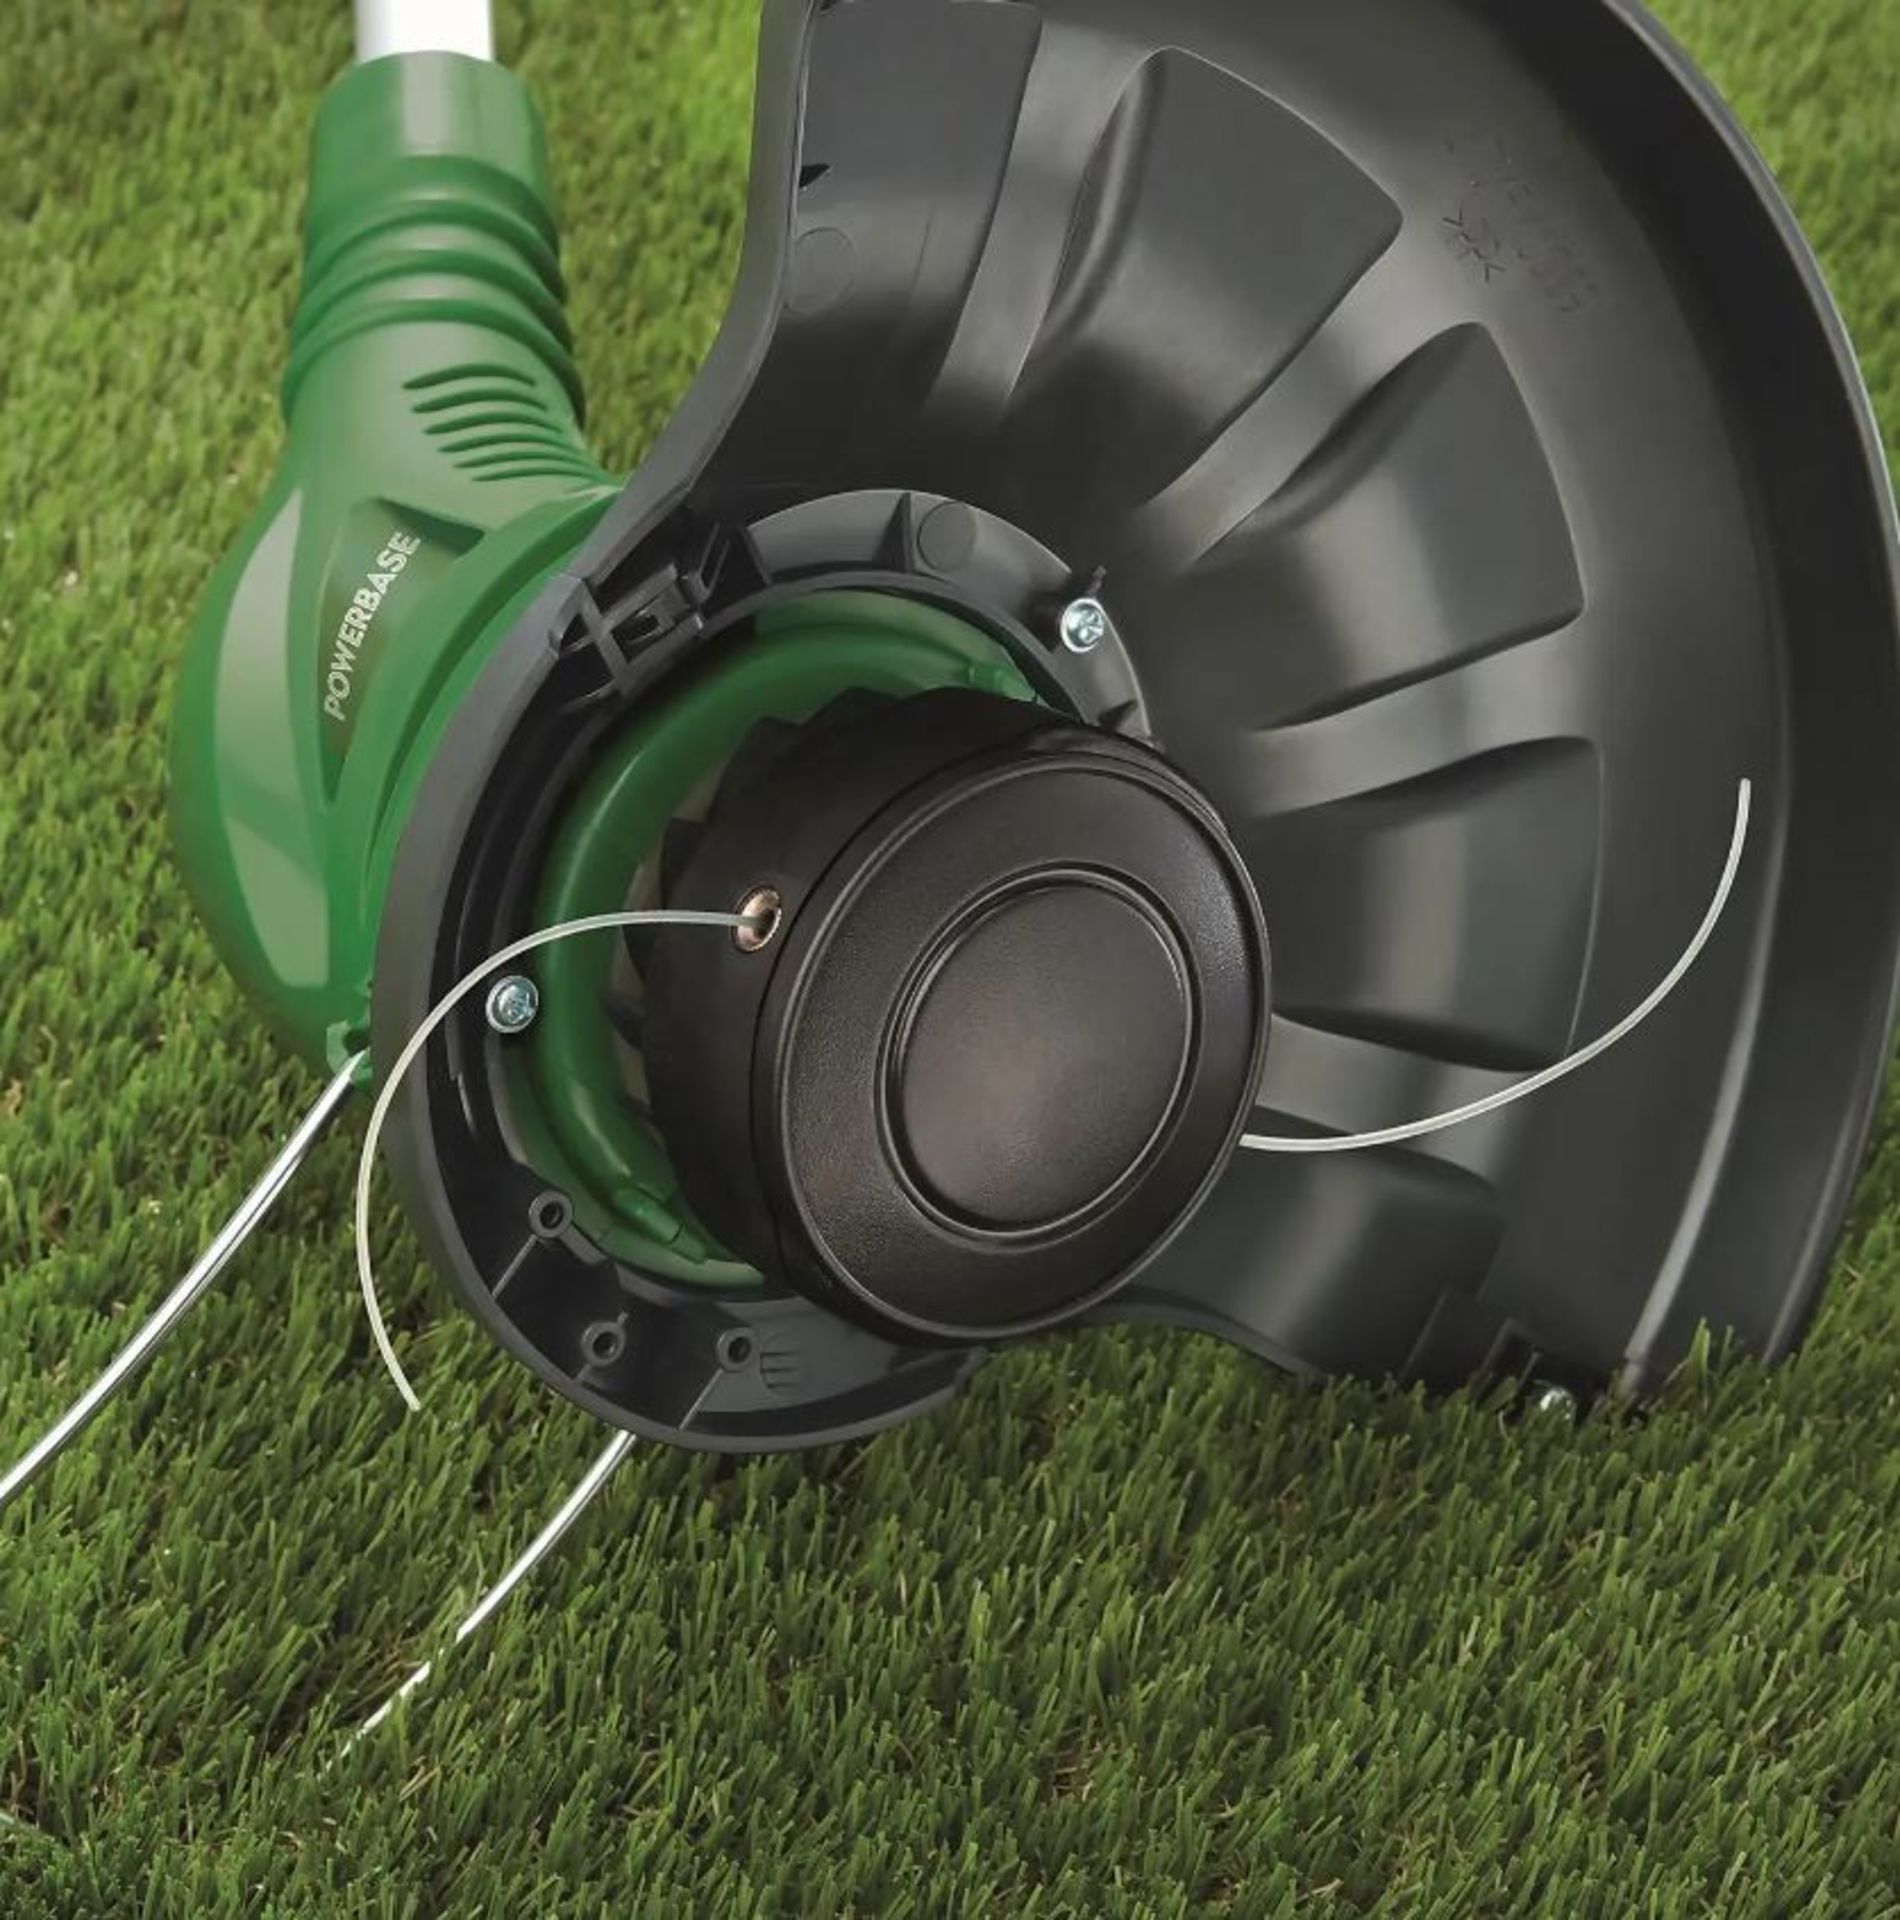 (R15A) 2x Powerbase Electric Grass Trimmer 450W. (Both Items Clean. Appears As New). - Image 2 of 3